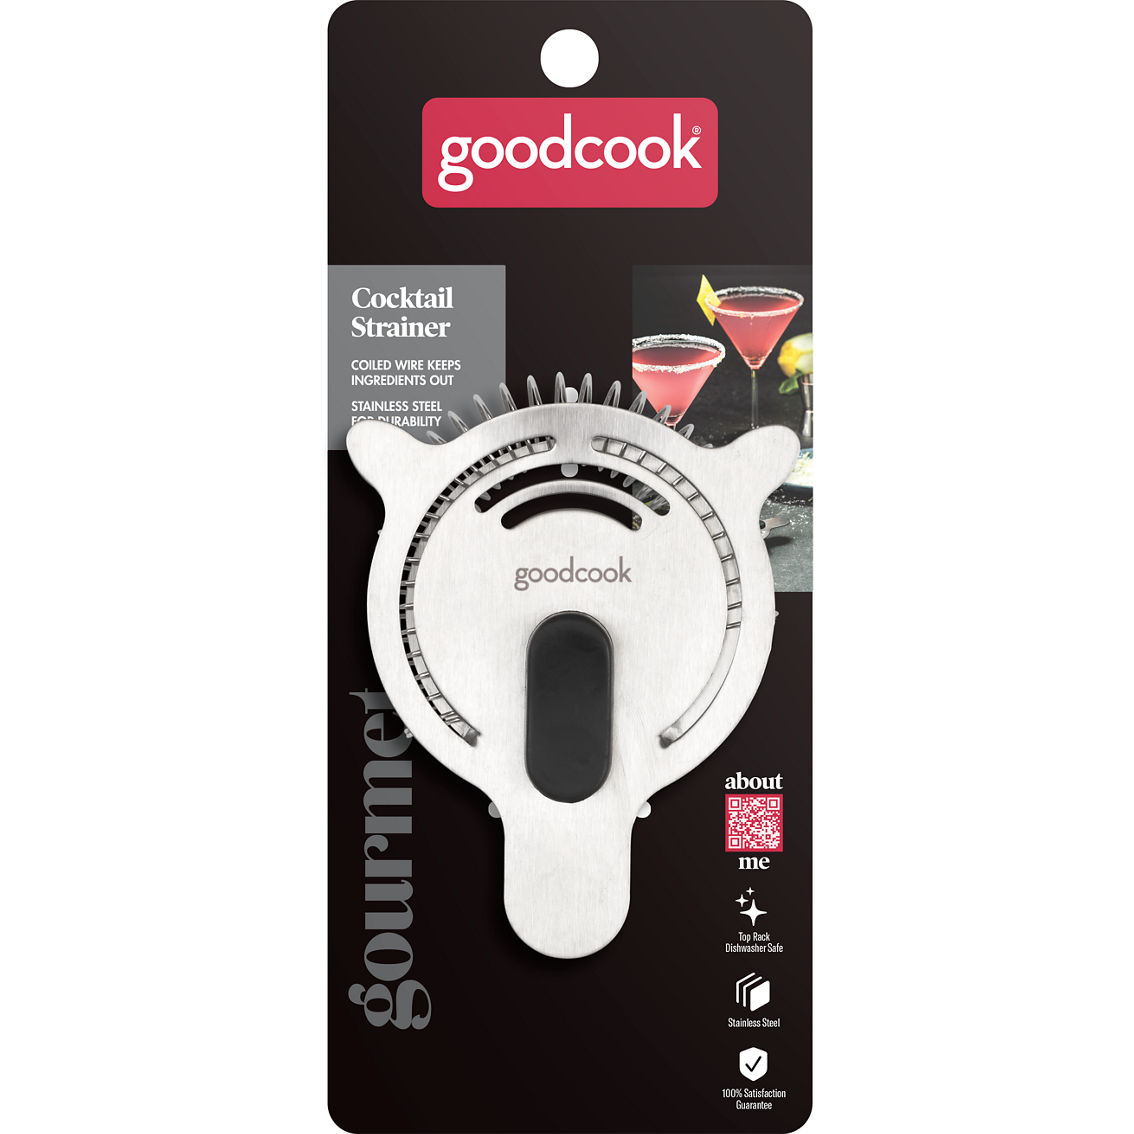 GoodCook Gourmet Cocktail Strainer - Image 4 of 7